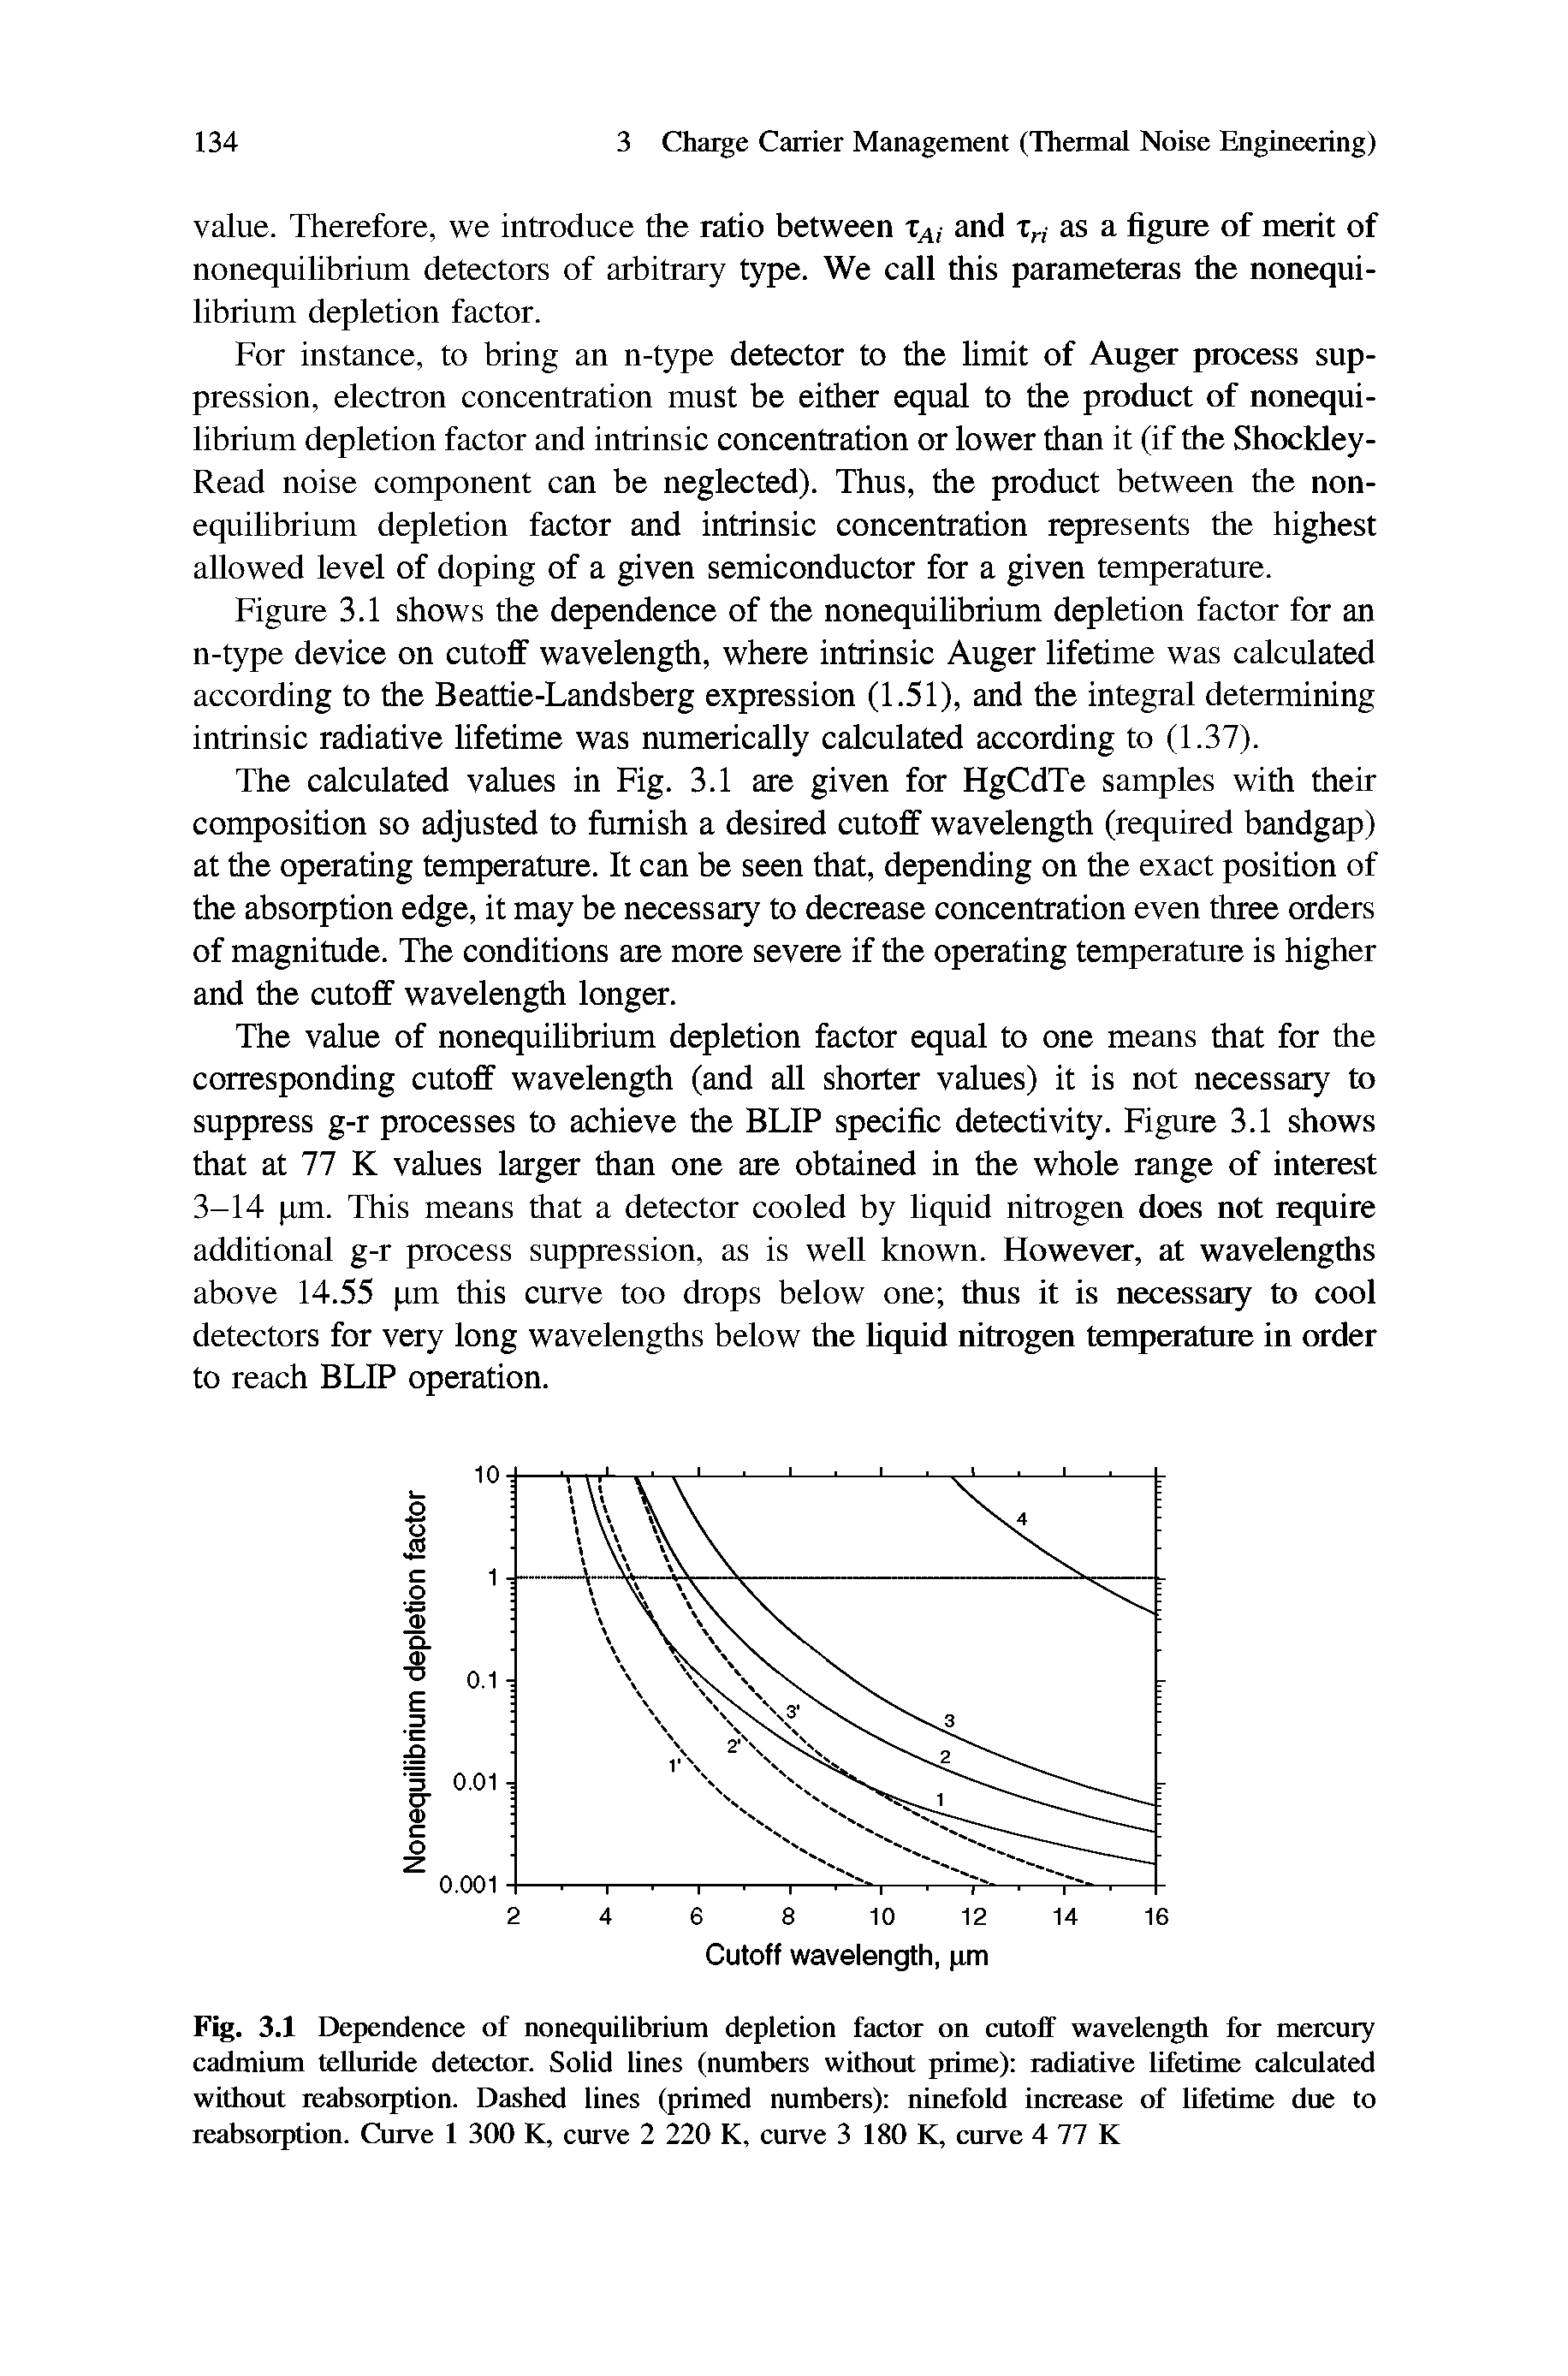 Fig. 3.1 Dependence of nonequilibrium depletion factor on cutoff wavelength for mercury cadmium telluride detector. Solid lines (numbers without prime) radiative lifetime calculated without reabsorption. Dashed lines (primed numbers) ninefold increase of lifetime due to reabsorption. Curve 1 300 K, curve 2 220 K, curve 3 180 K, curve 4 77 K...